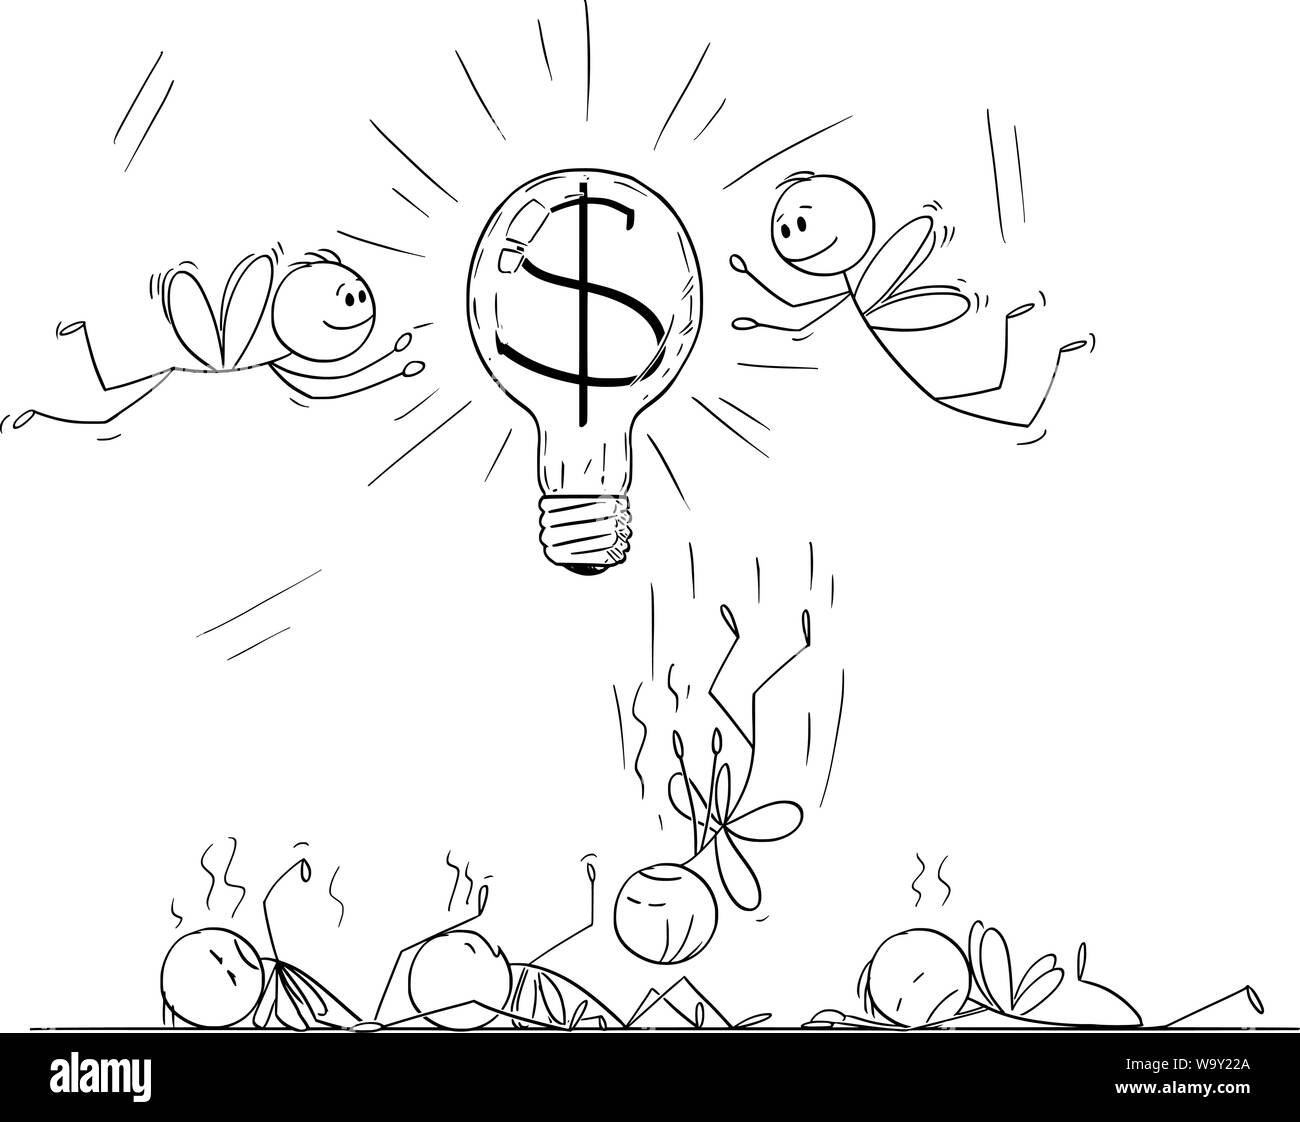 Vector cartoon stick figure drawing conceptual illustration of businessmen as flies or moths attracted by light bulb with dollar or money symbol, some flying around and some are dead, killed by glow and heat. Stock Vector